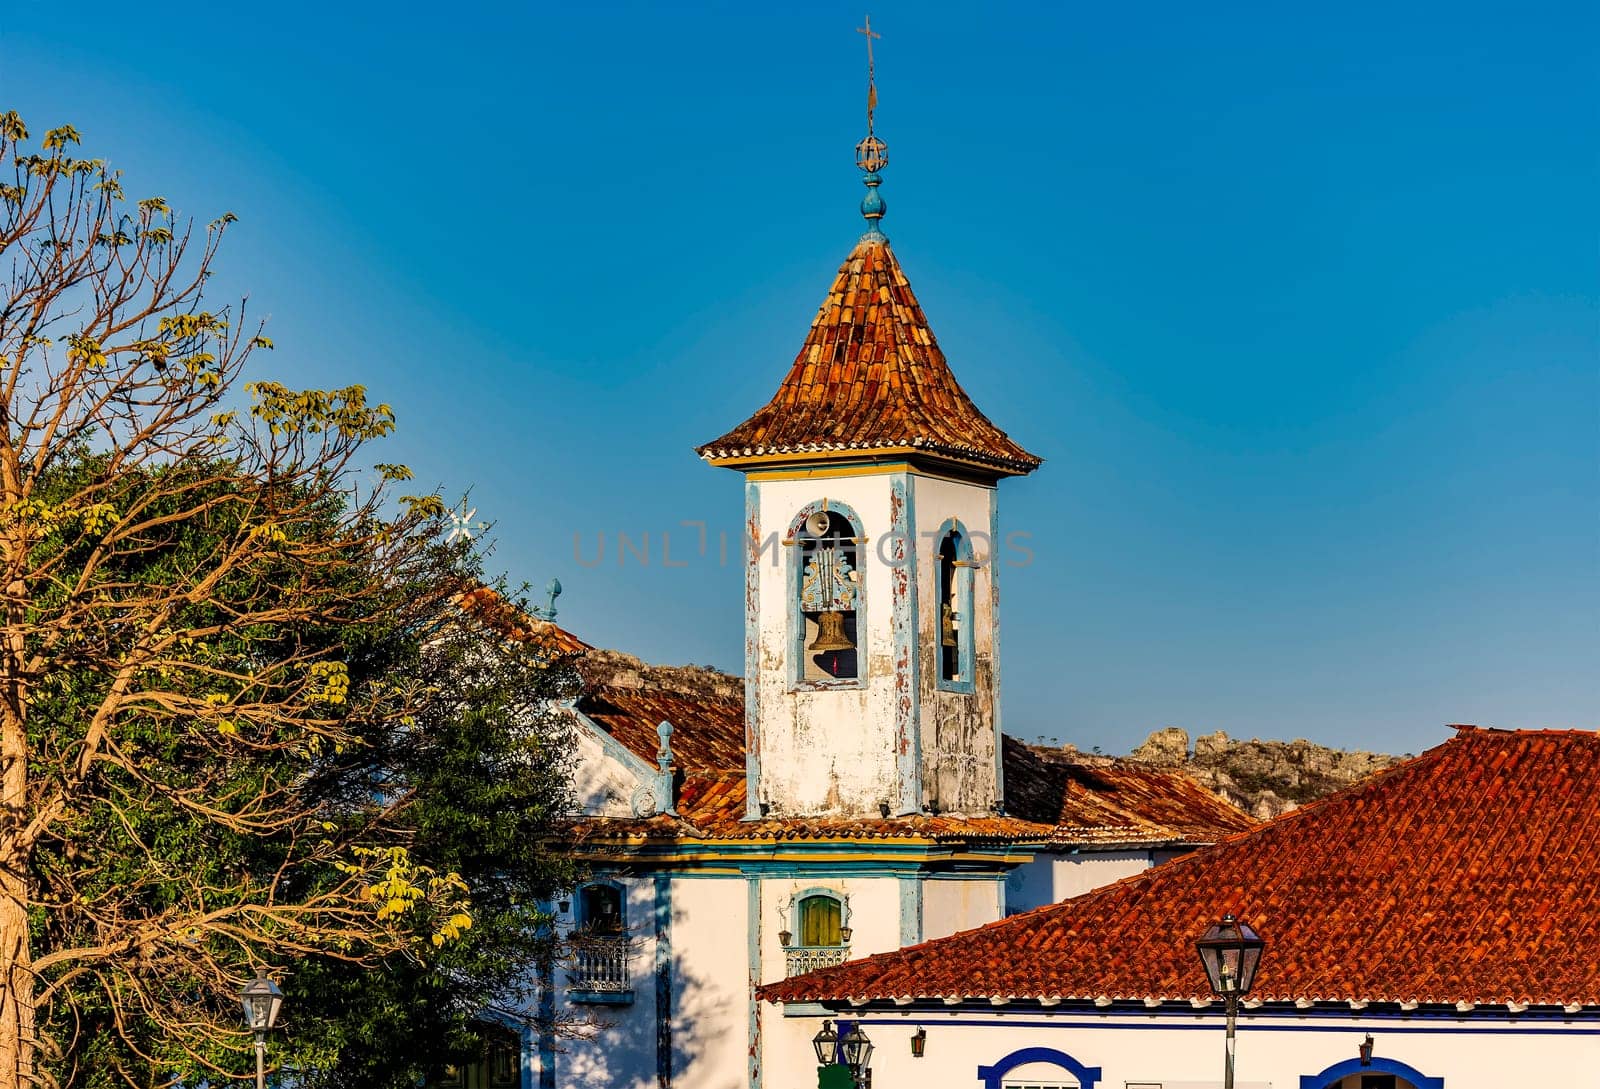 Baroque church bell tower with rising through the trees and roofs of the historic town of Diamantina in Minas Gerais, Brazil